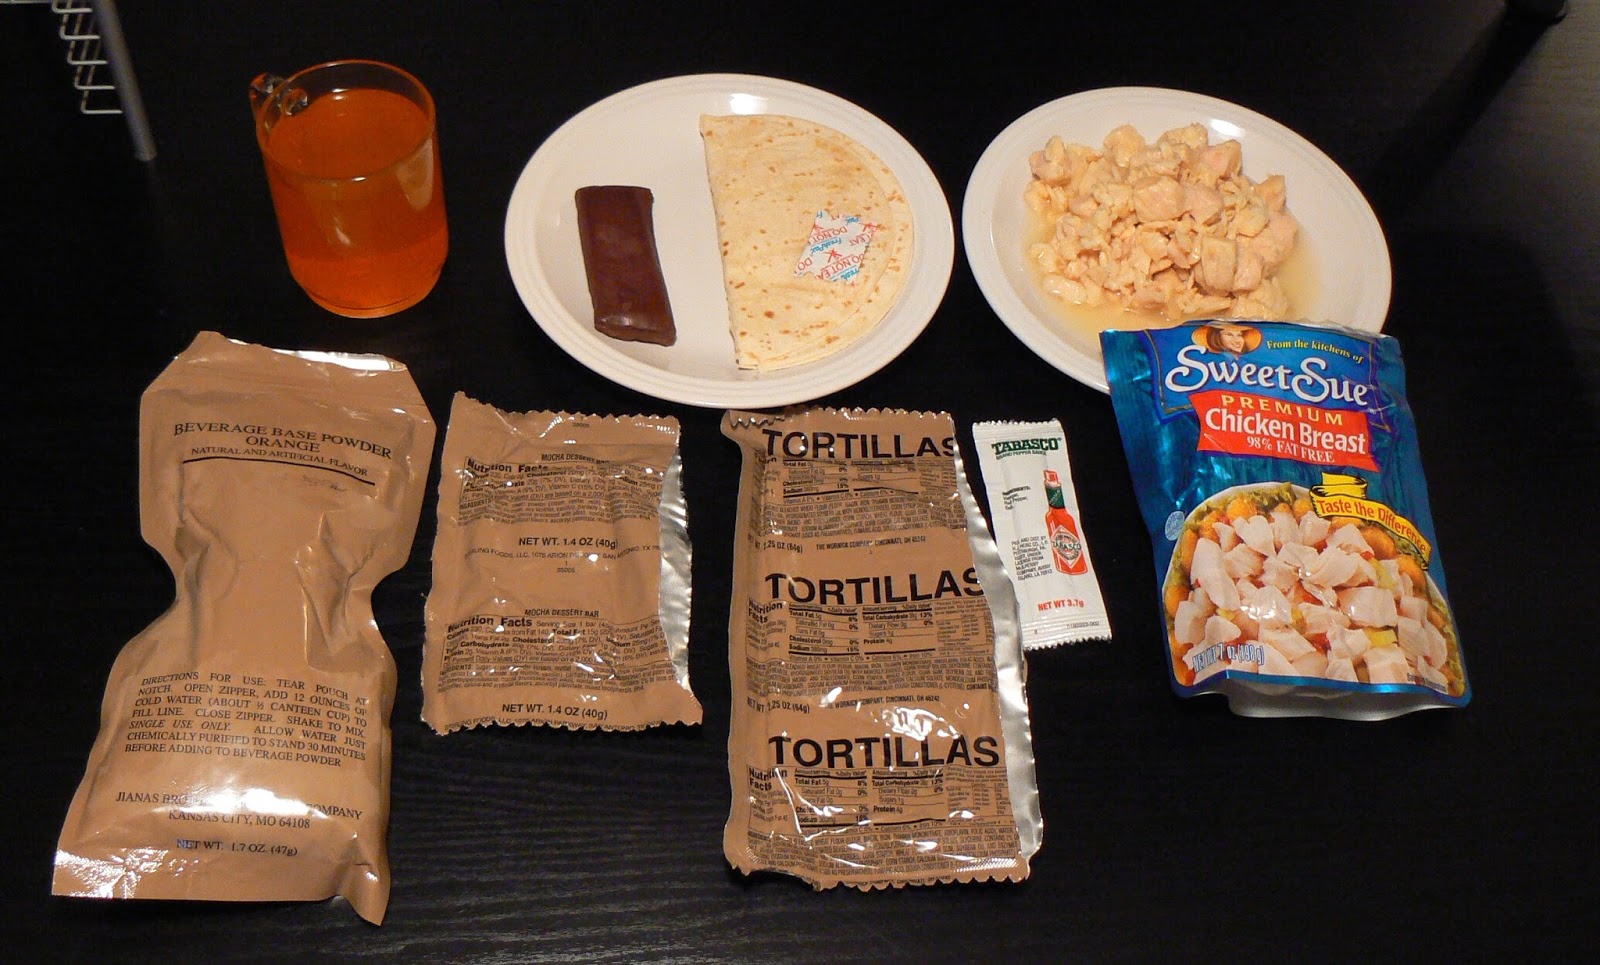 According2Robyn: MRE Review: First Strike Ration Menu 2 (Part 2)